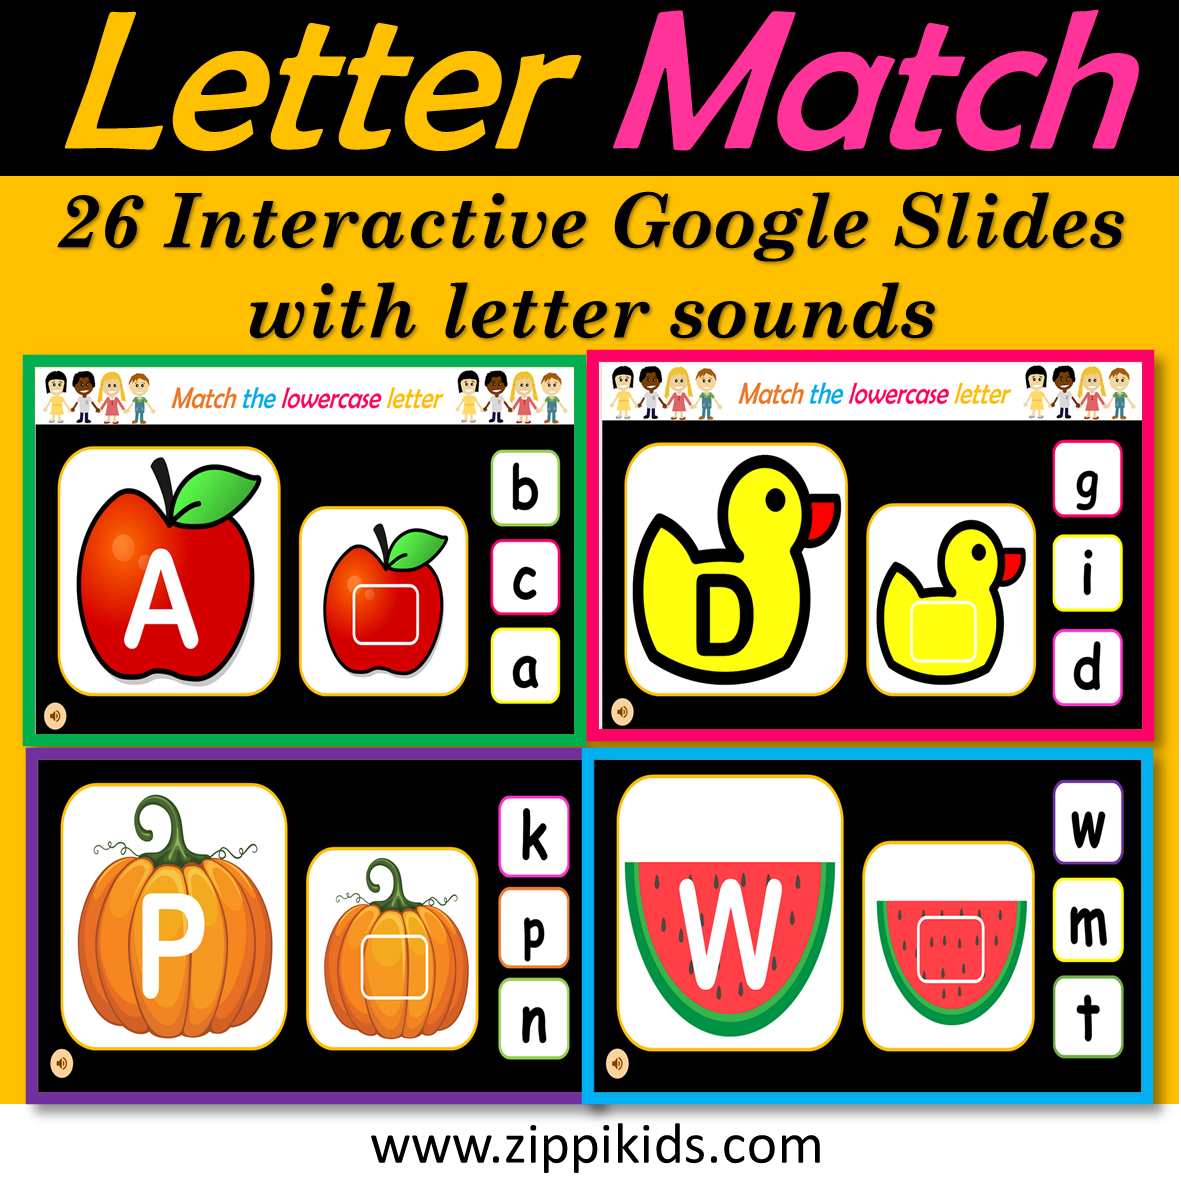 Digital Letter Matching, Uppercase and Lowercase, Virtual - 26 Google Slides